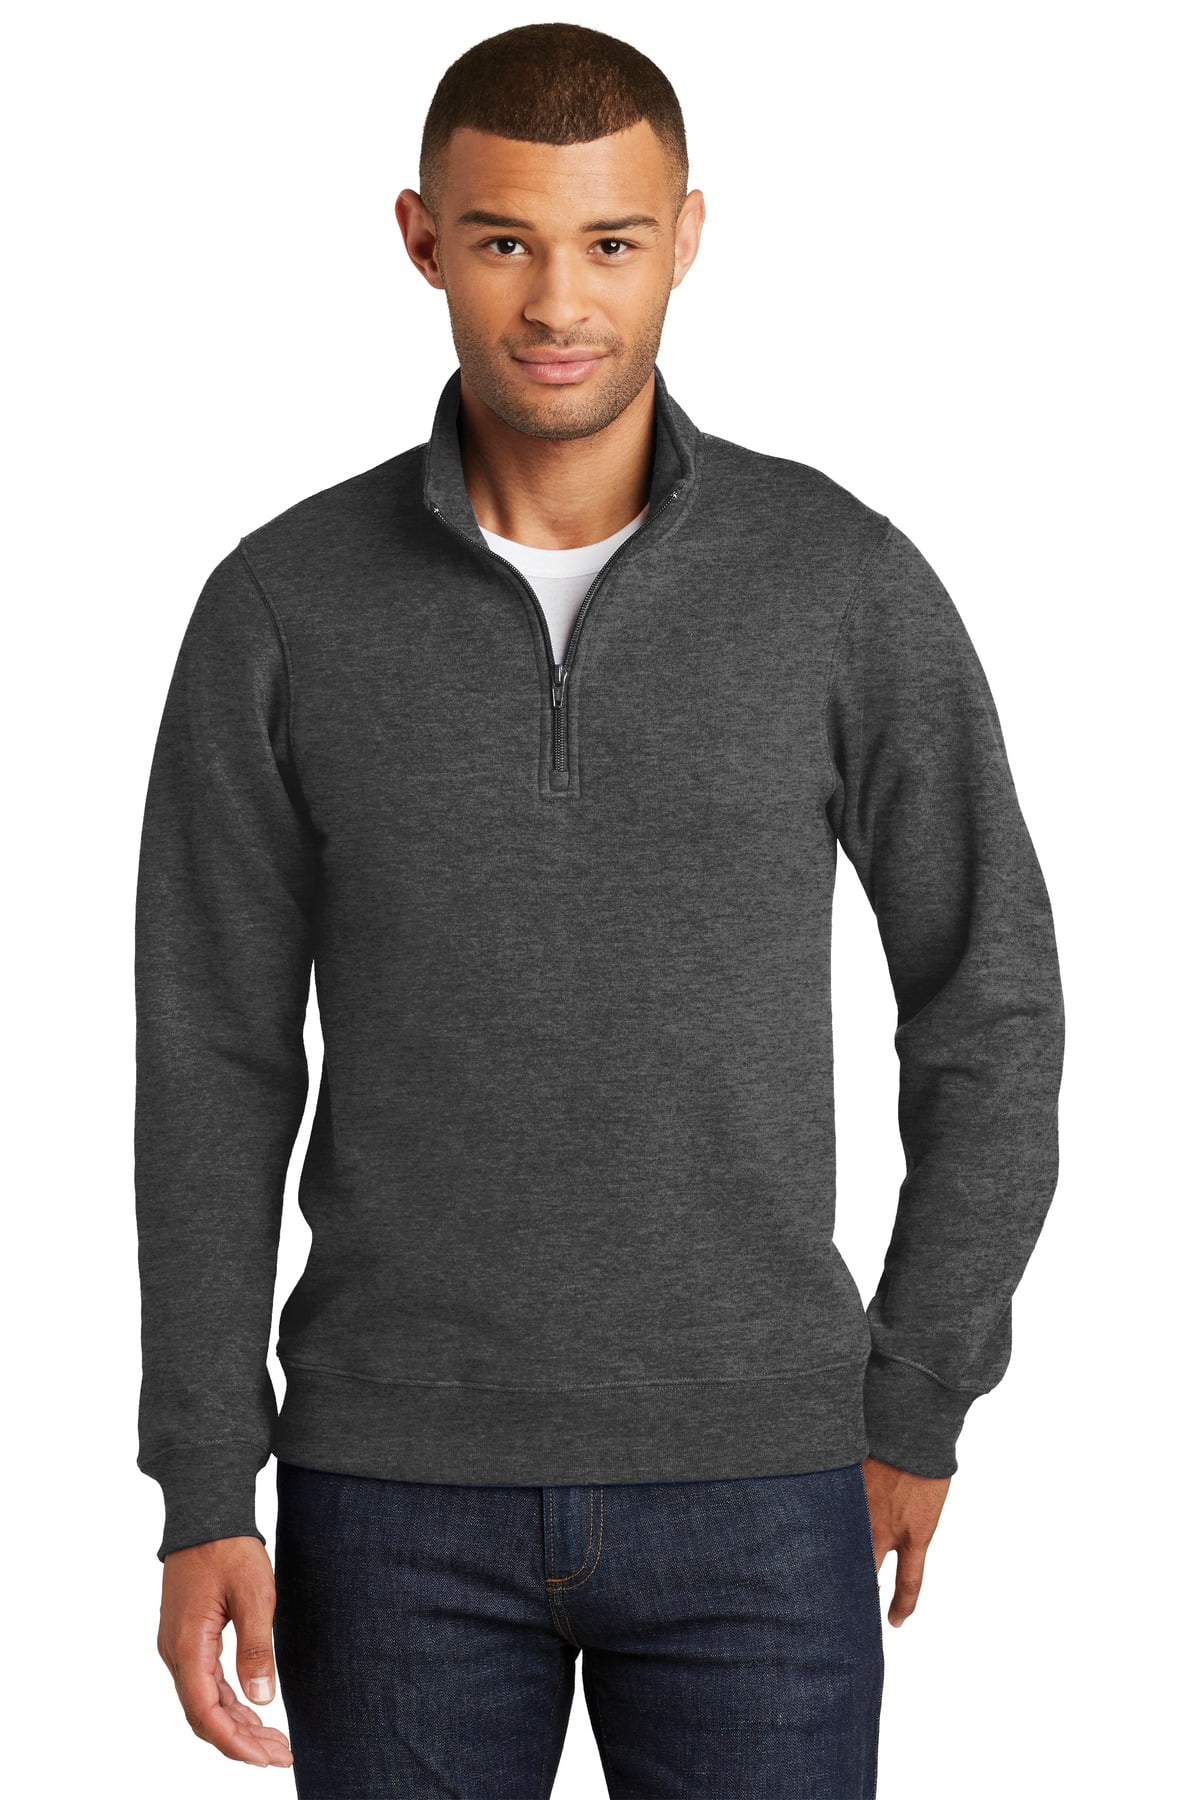 Top of the World Mens Team Color Heathered Poly Half Zip Pullover